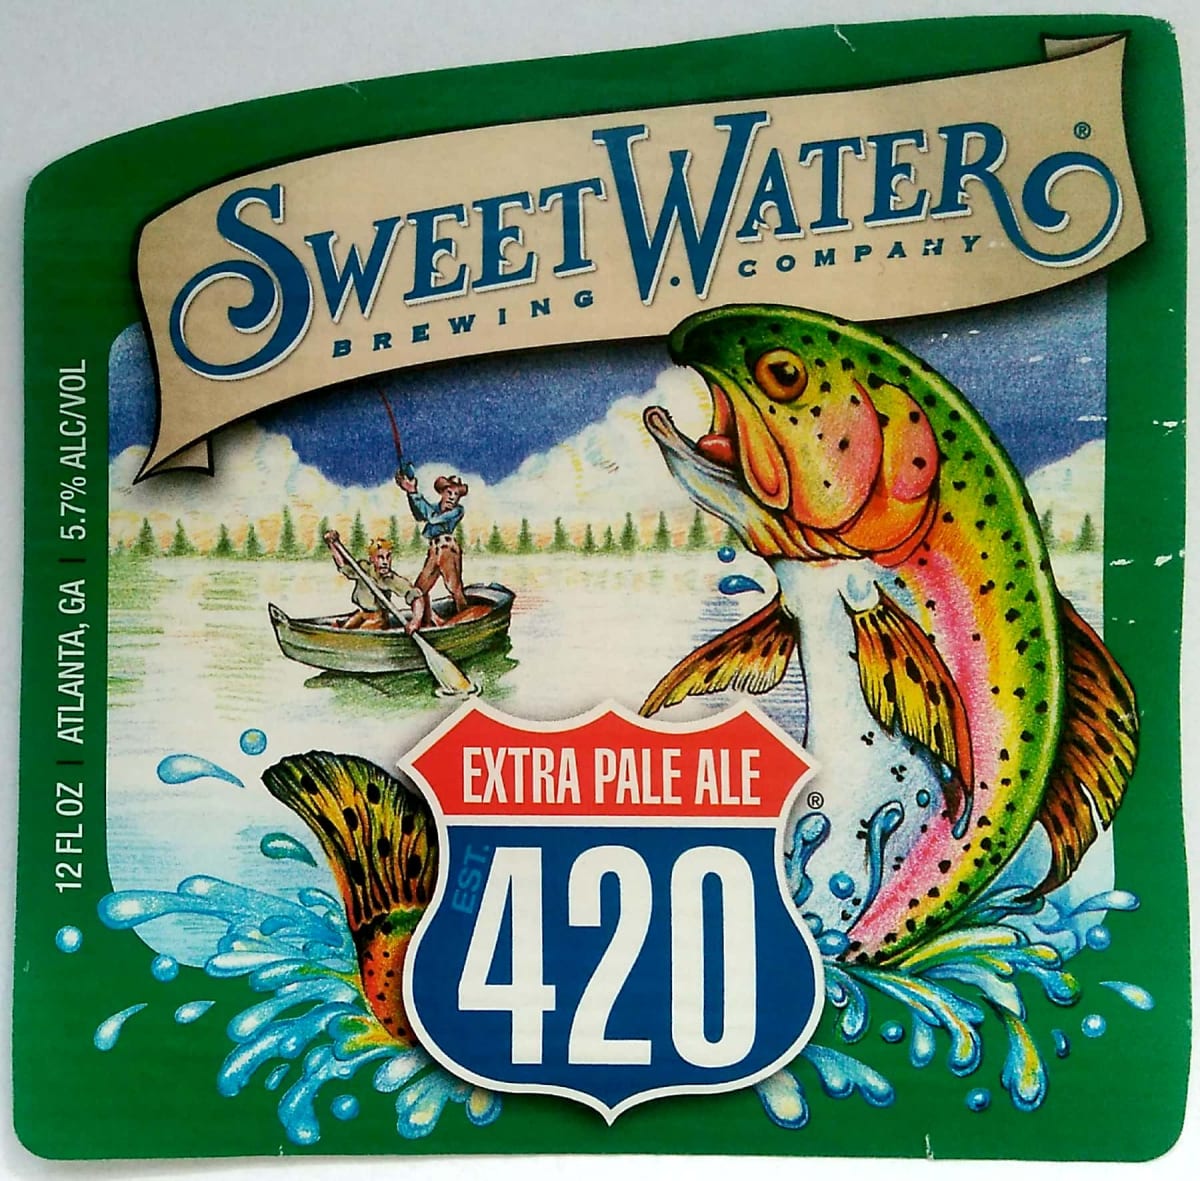 Sweet Water Extra Pale ALE 420